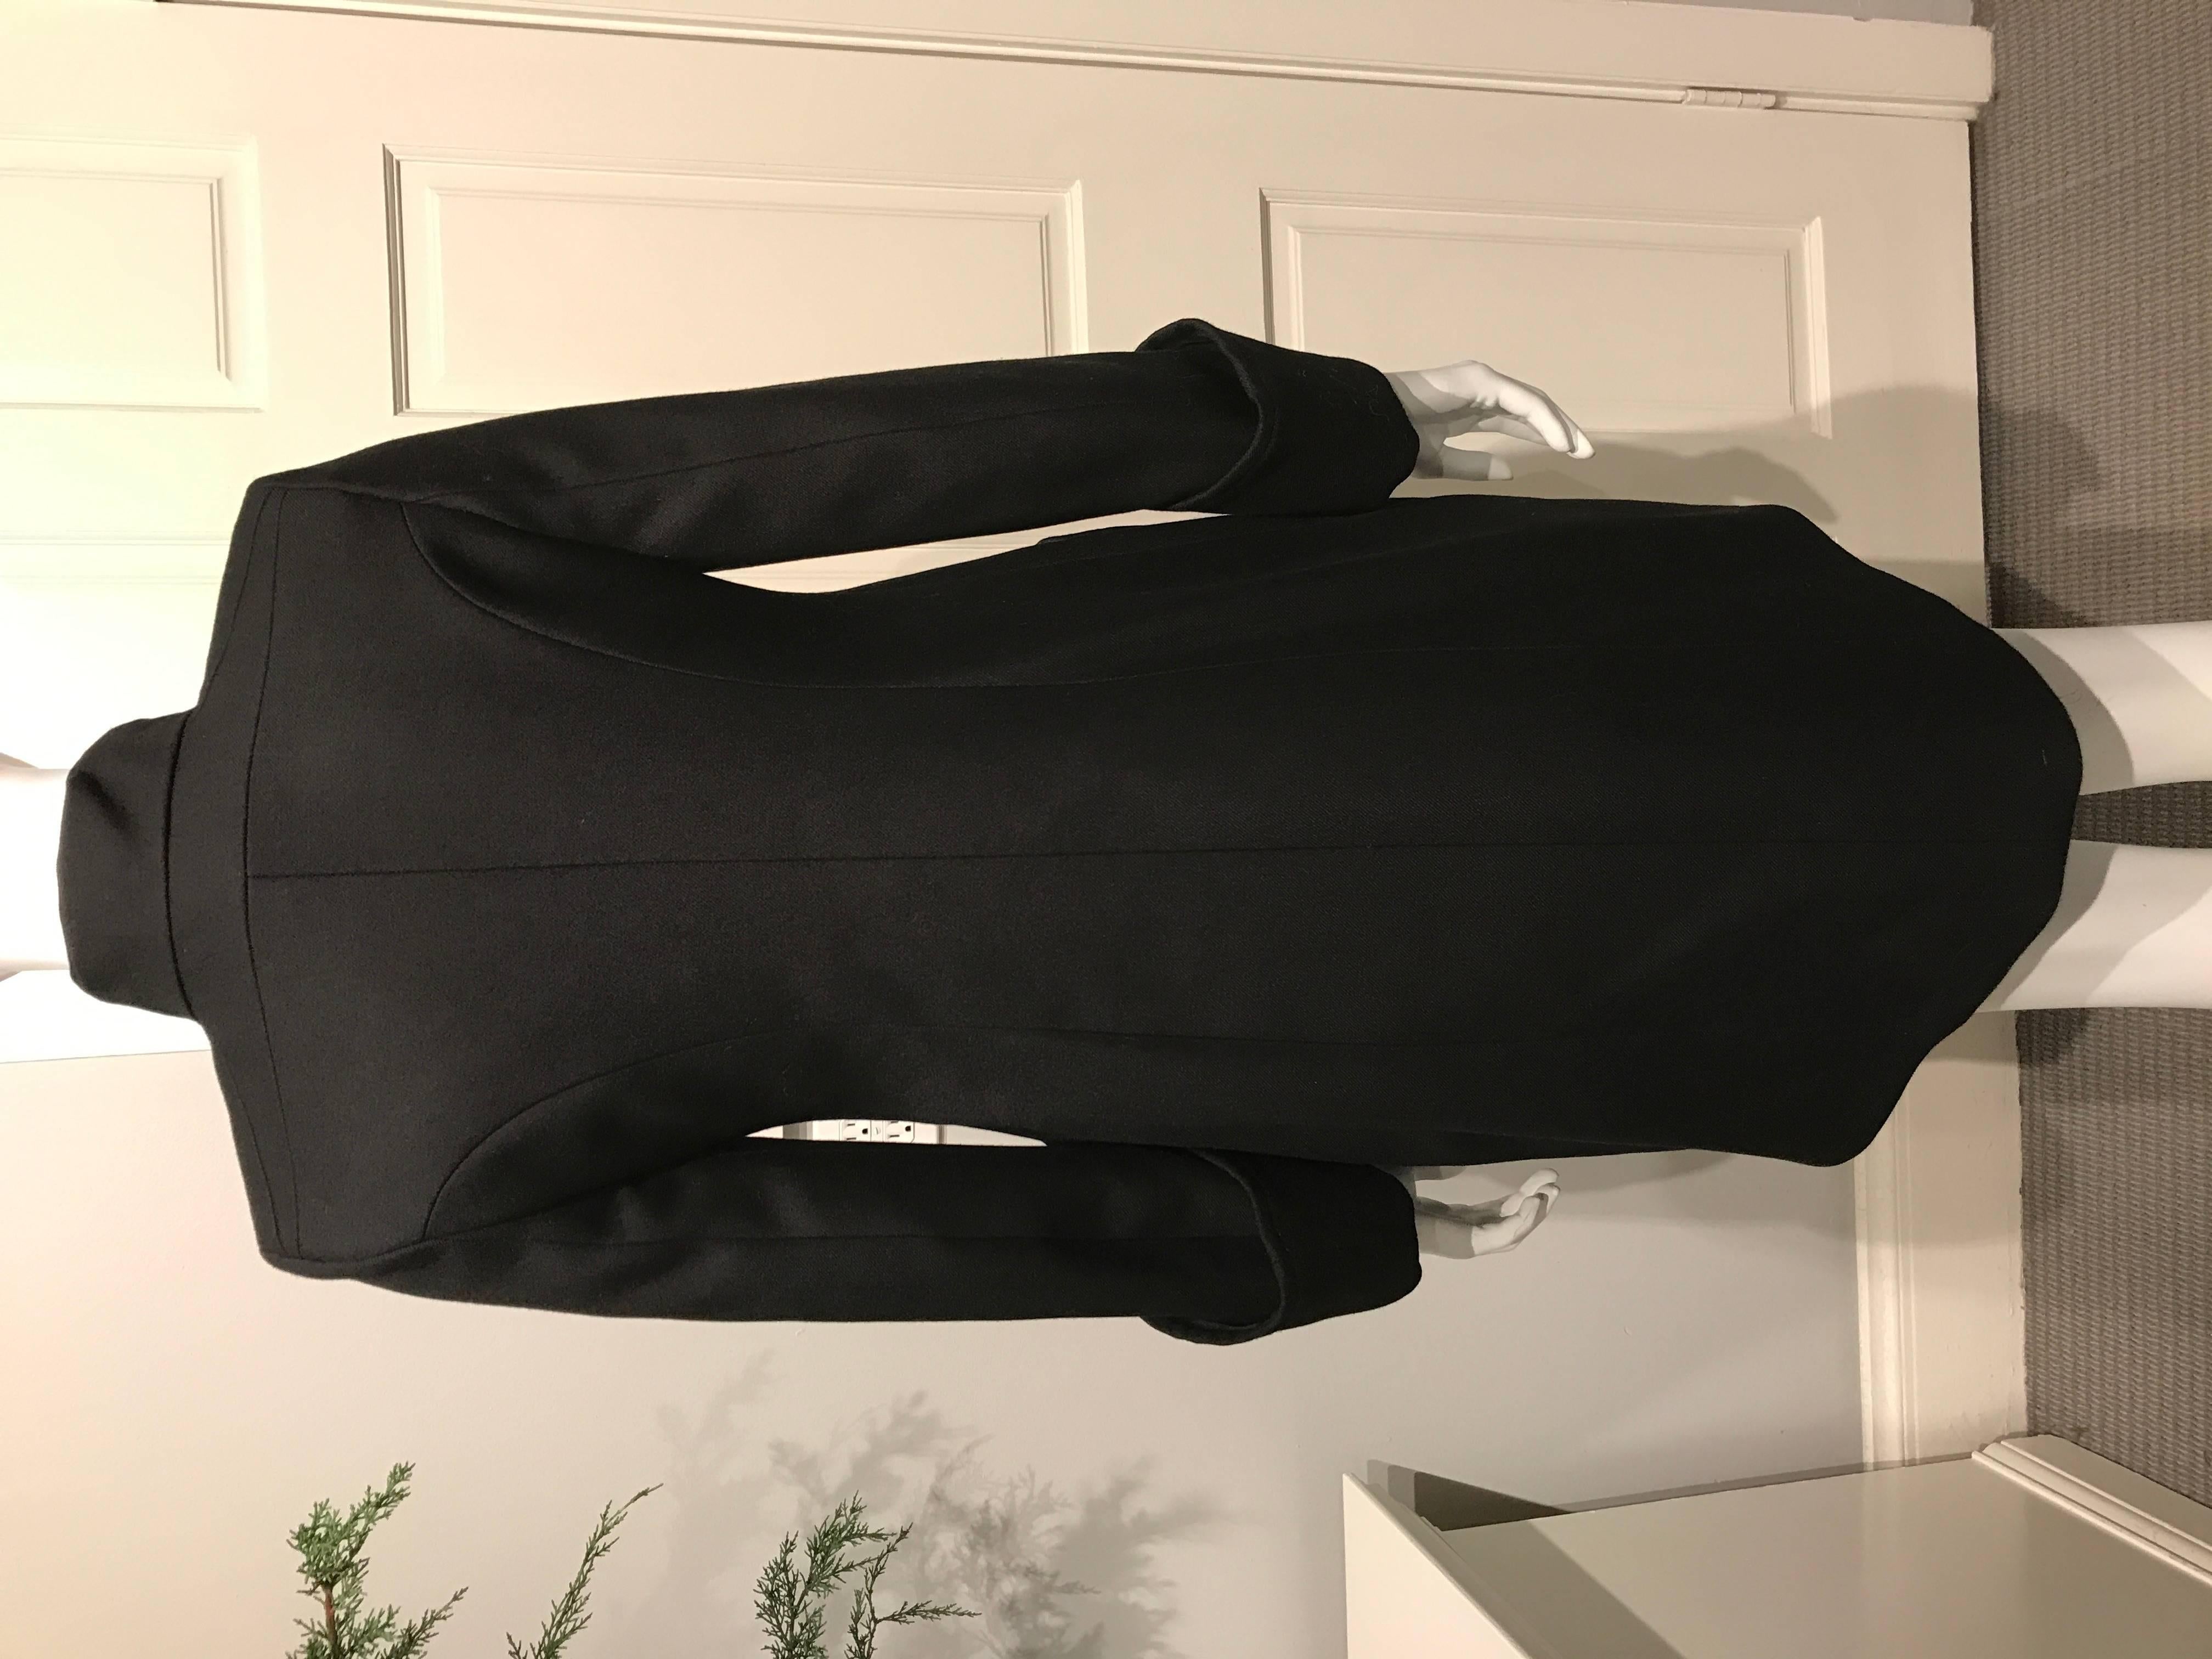 Balenciaga Black Coat With Asian Letters On Breast Pocket For Sale 1